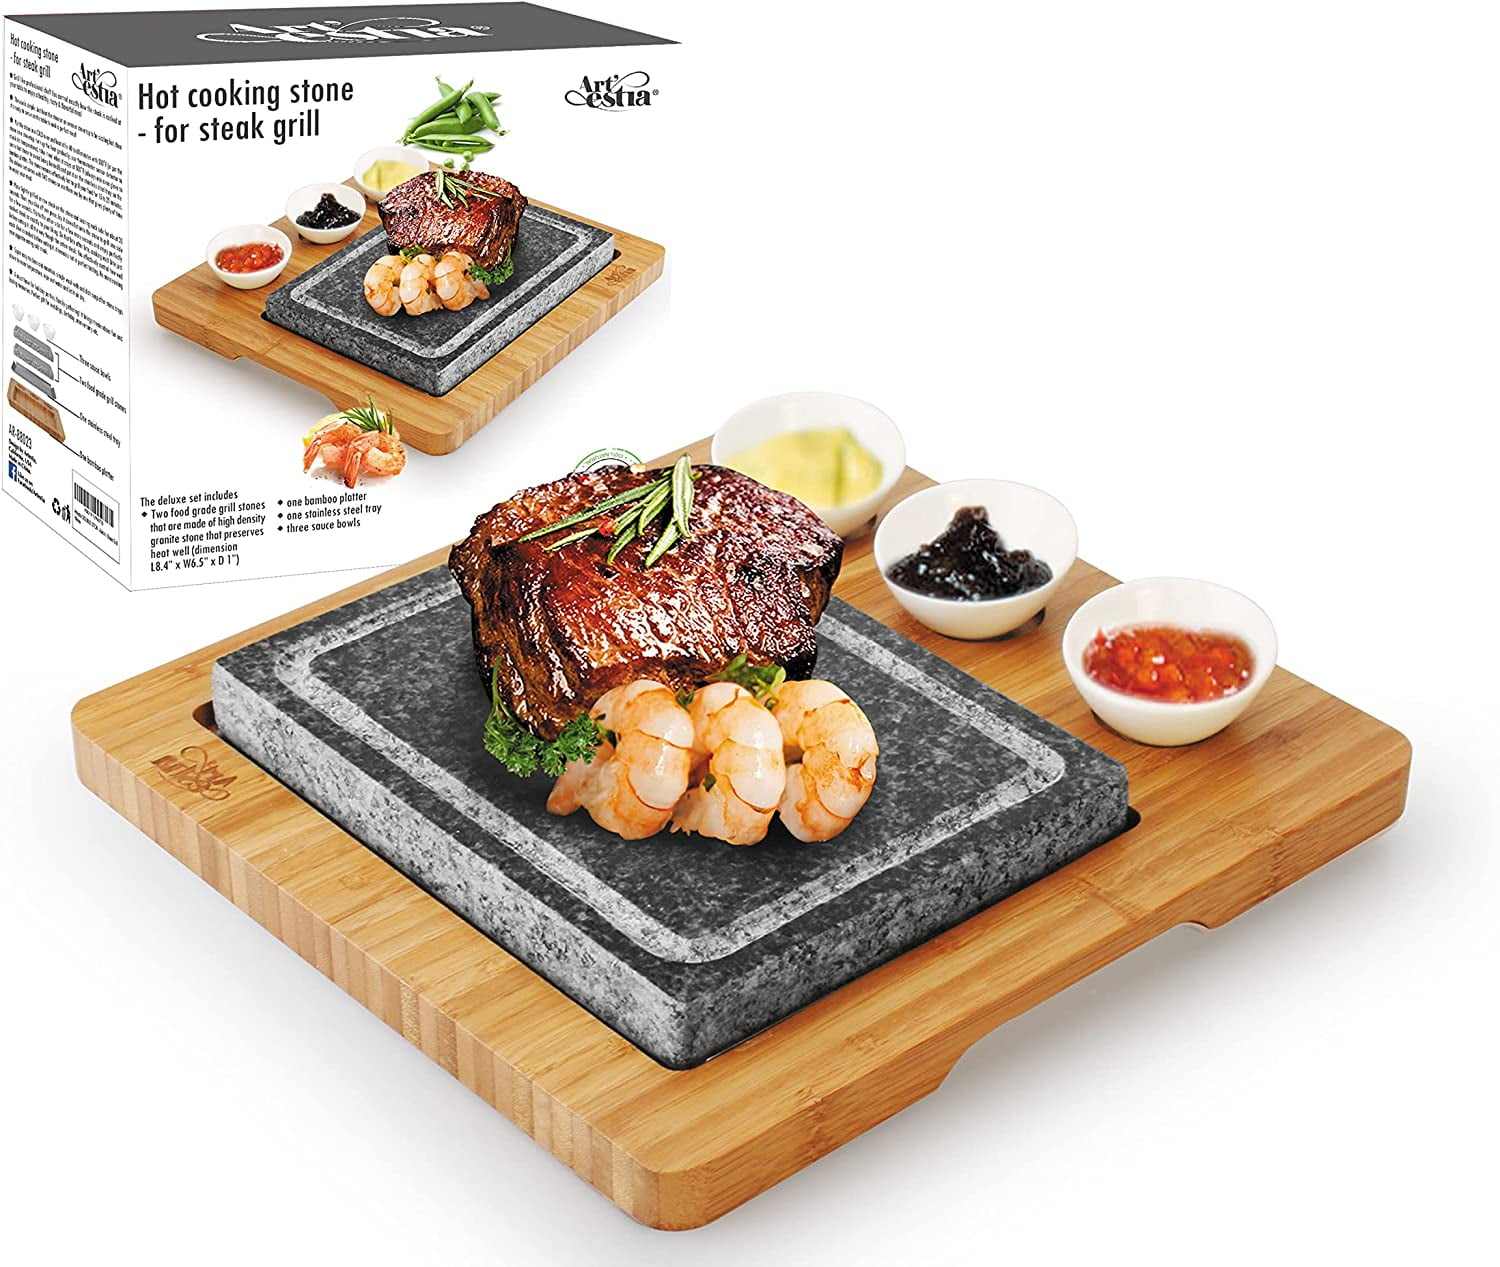 Nerthus FIH 386 Hot stone grill set Grill with stone Includes alcohol burner and wood stand base. 